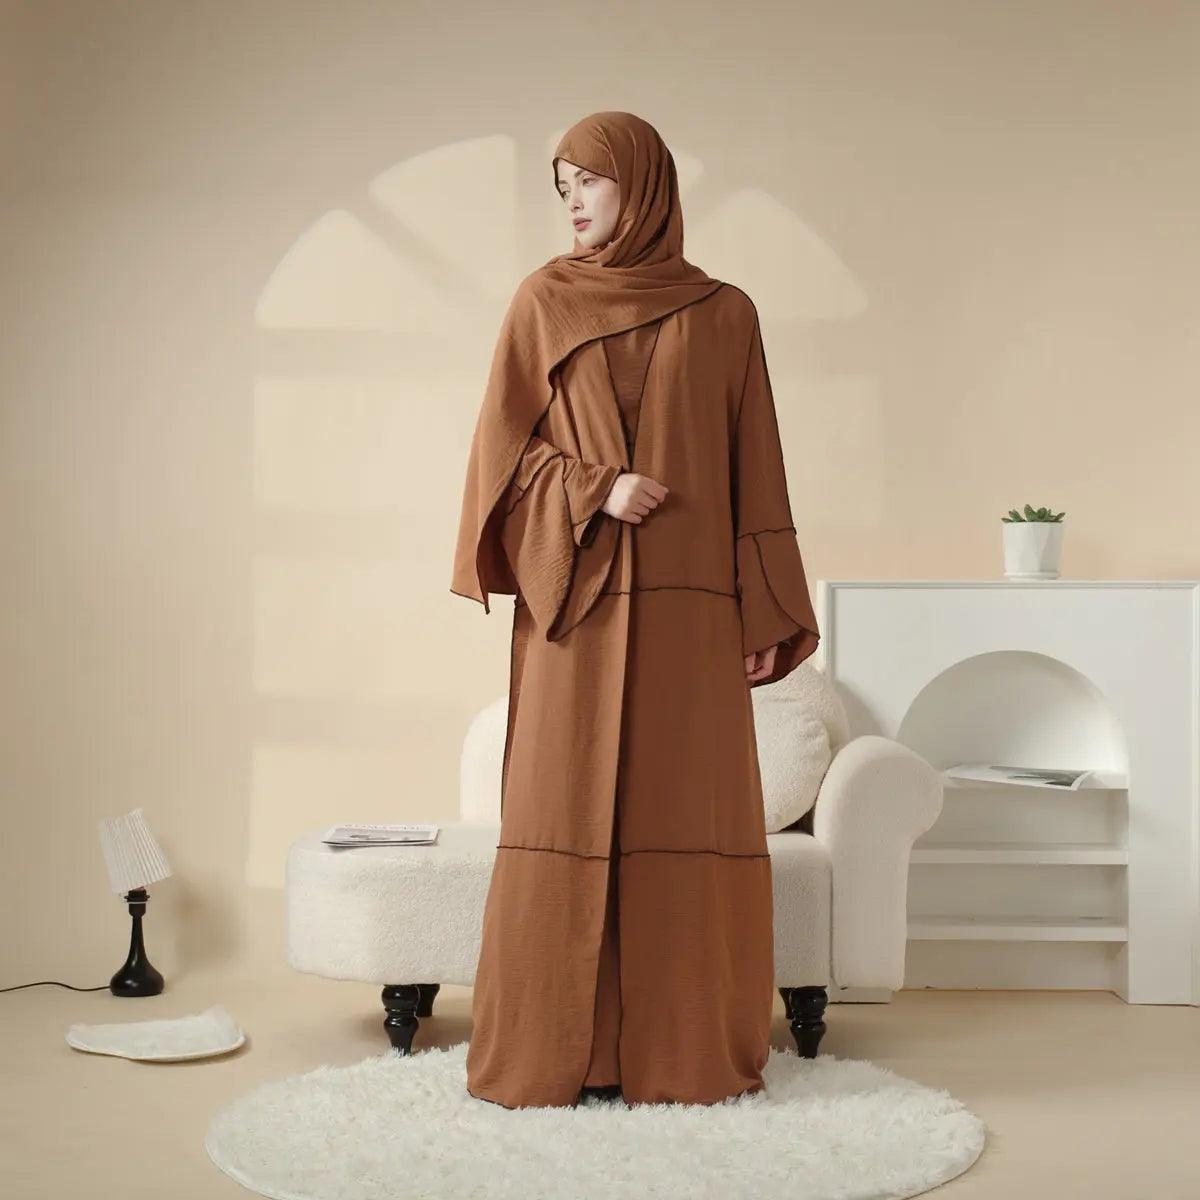 MOA030 Crepe Splicing Open Abaya with Hijab 4-piece Set - Mariam's Collection